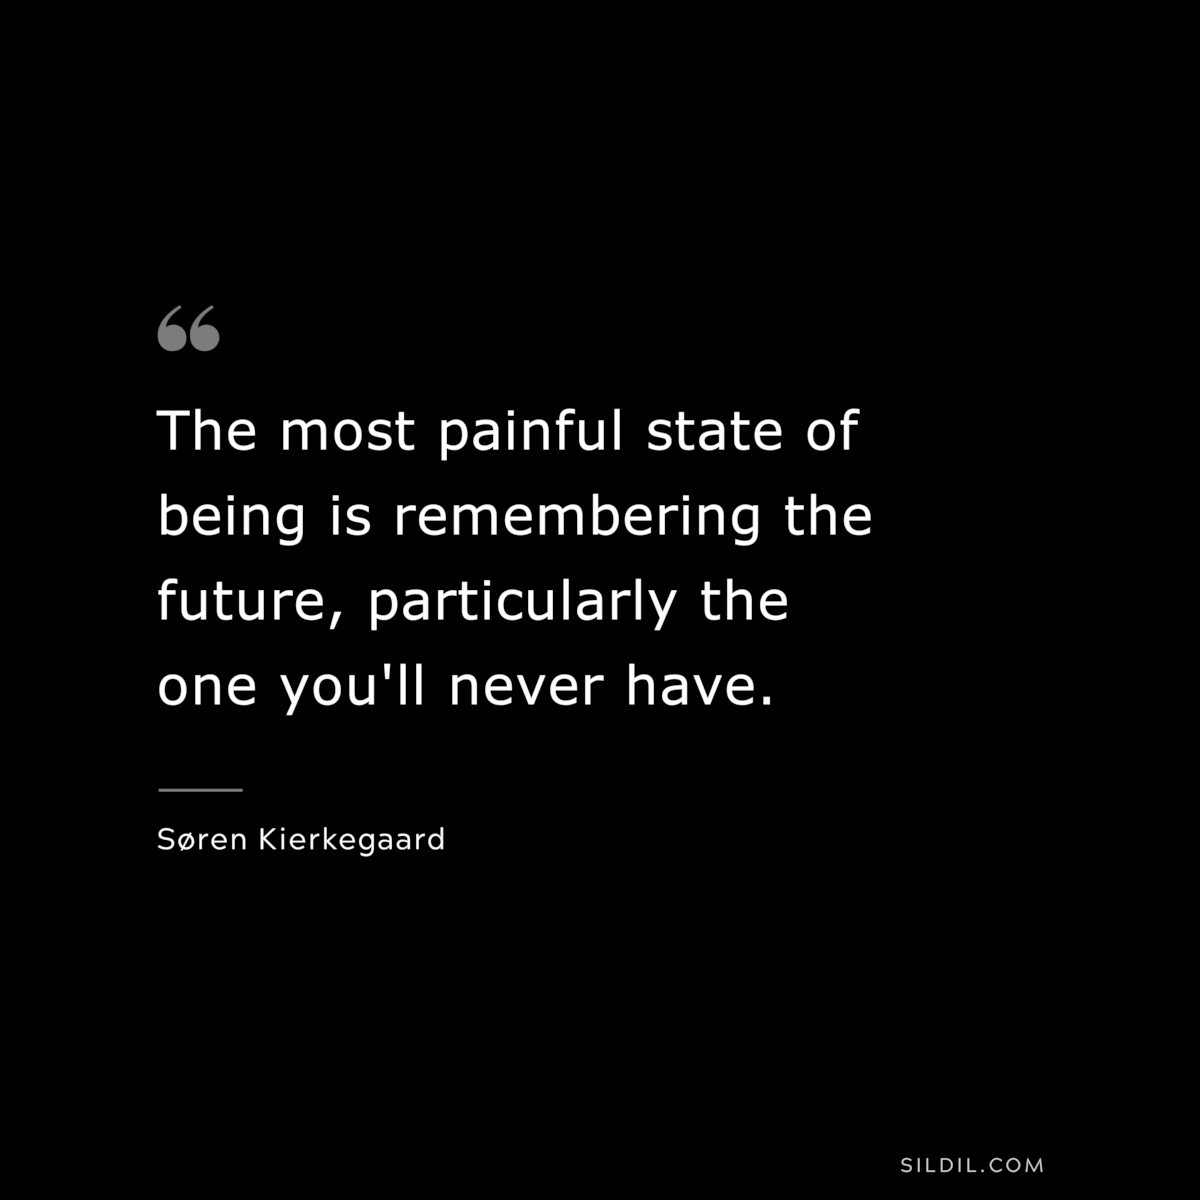 The most painful state of being is remembering the future, particularly the one you'll never have. ― Søren Kierkegaard